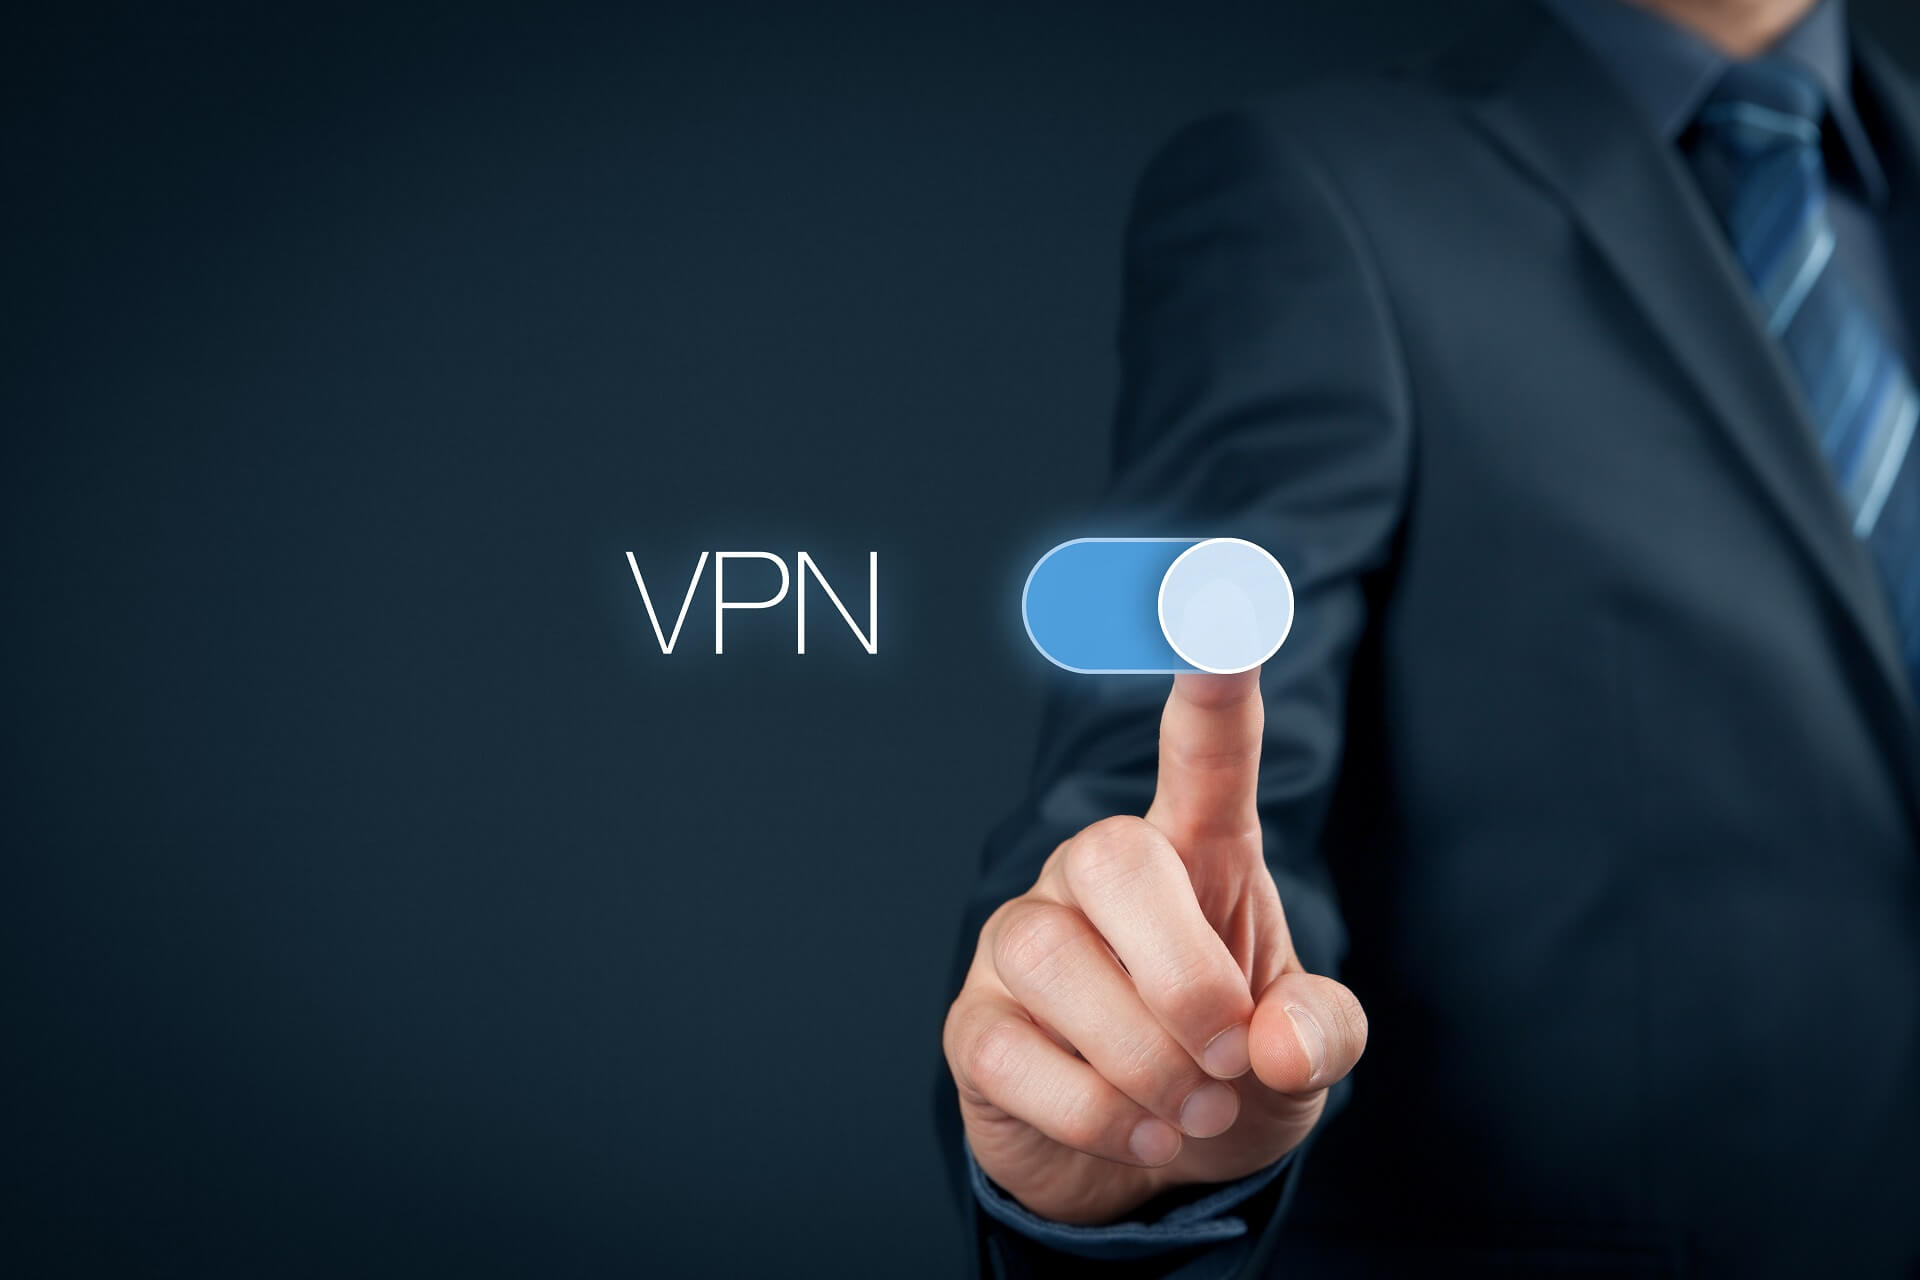 How to route all traffic through VPN